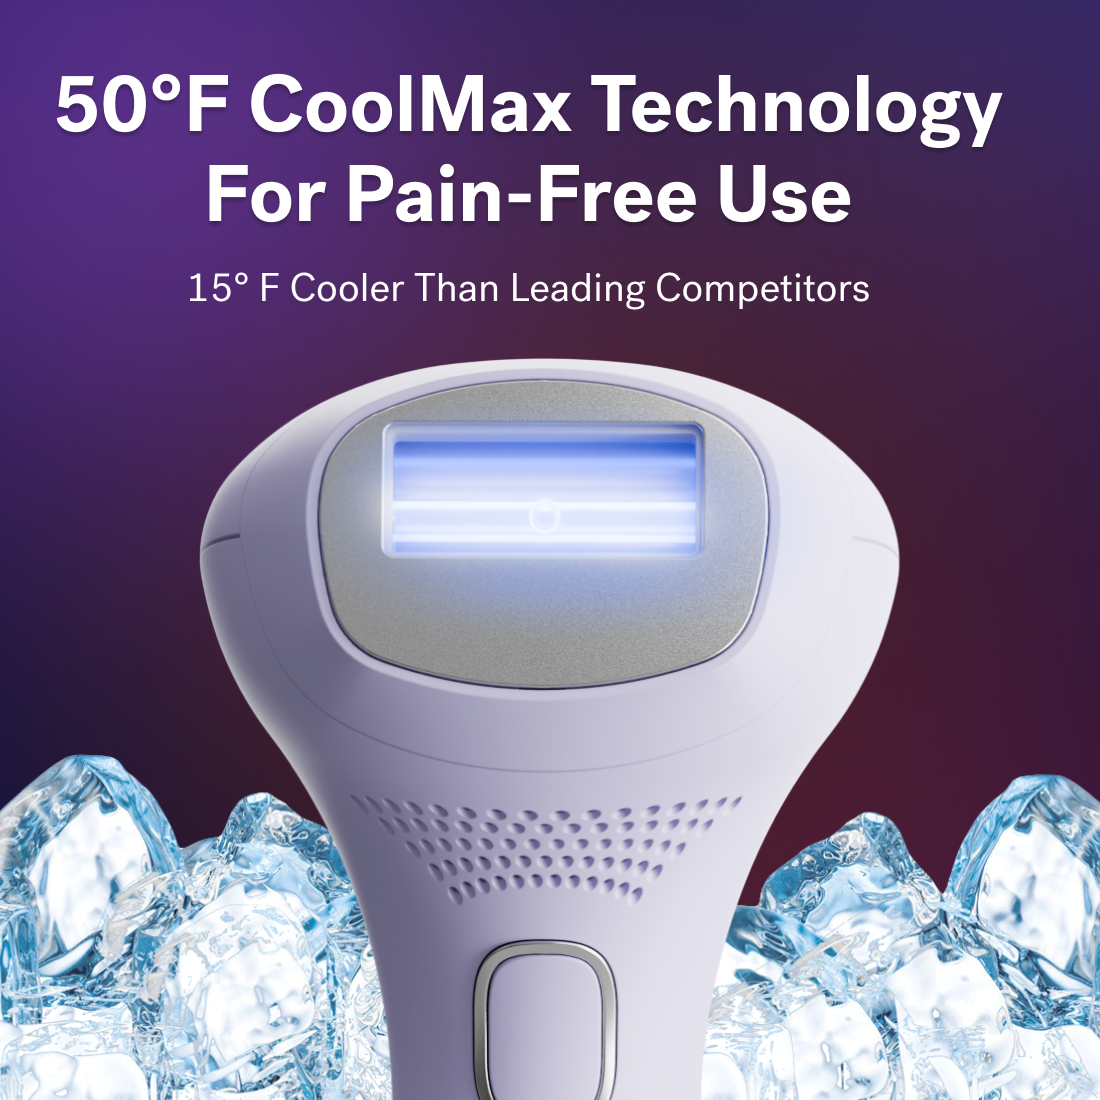 Lavender Lust - A white handheld Lumos IPL device from Michael Todd Beauty surrounded by ice cubes with text above it that reads "50°F COOLMAX Cooling Technology For Pain-Free Use - 15°F Cooler Than Leading Competitors. Includes Safety Skin Sensor for Extra Protection.